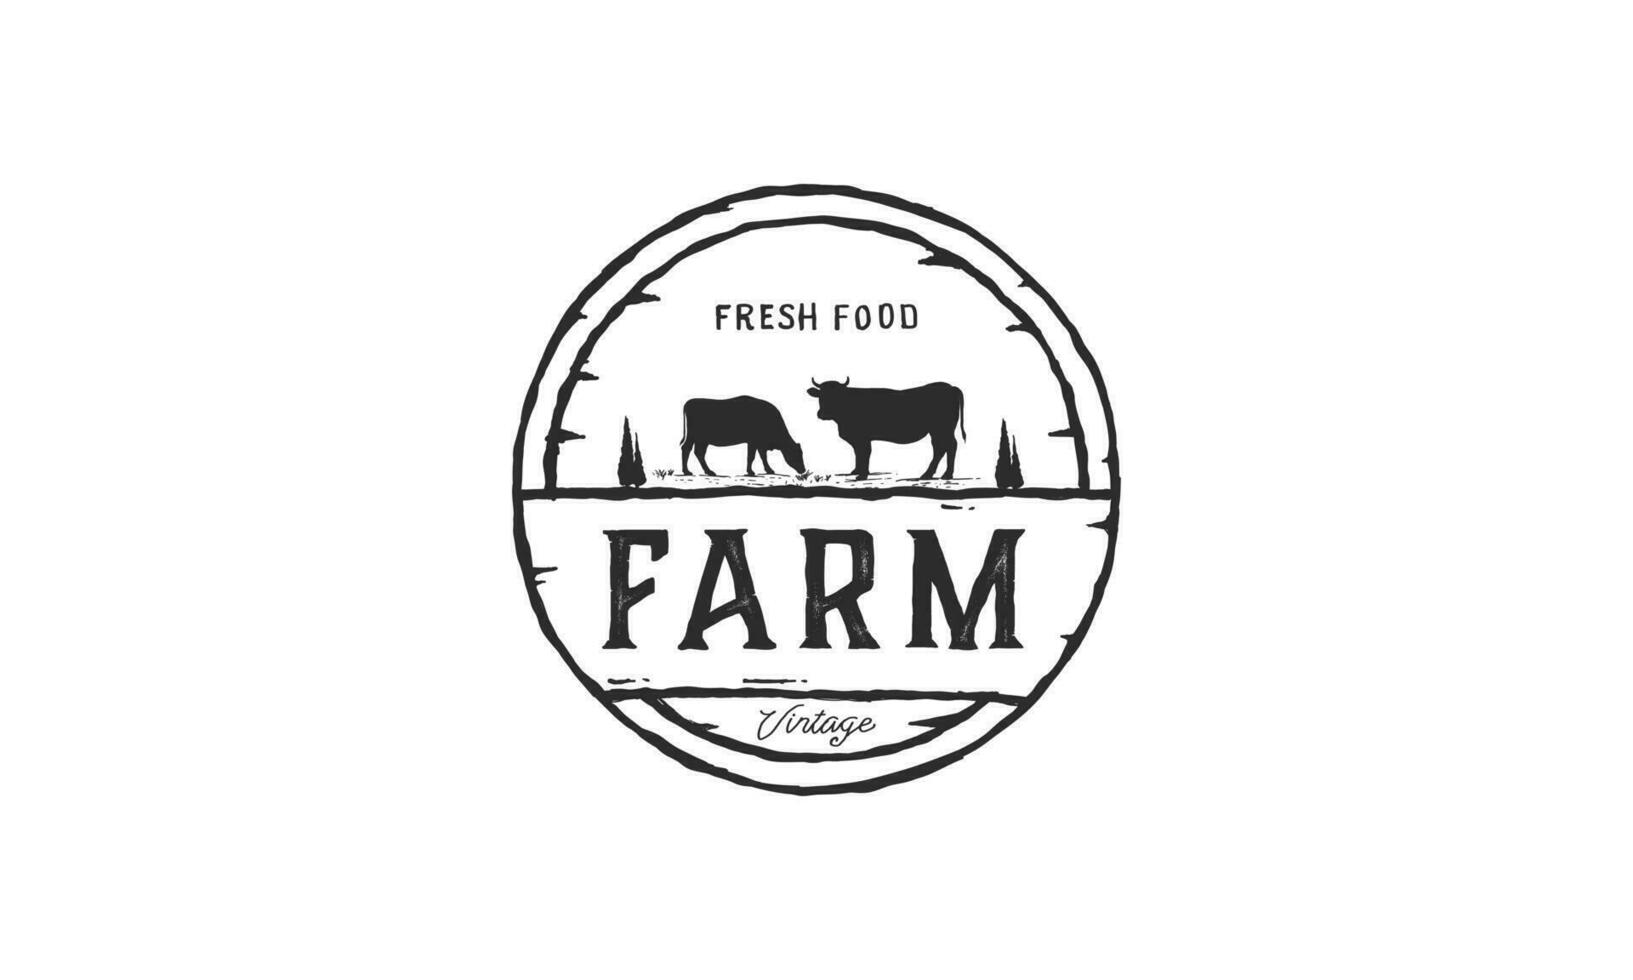 angus farm logo on white background and cow illustration vector